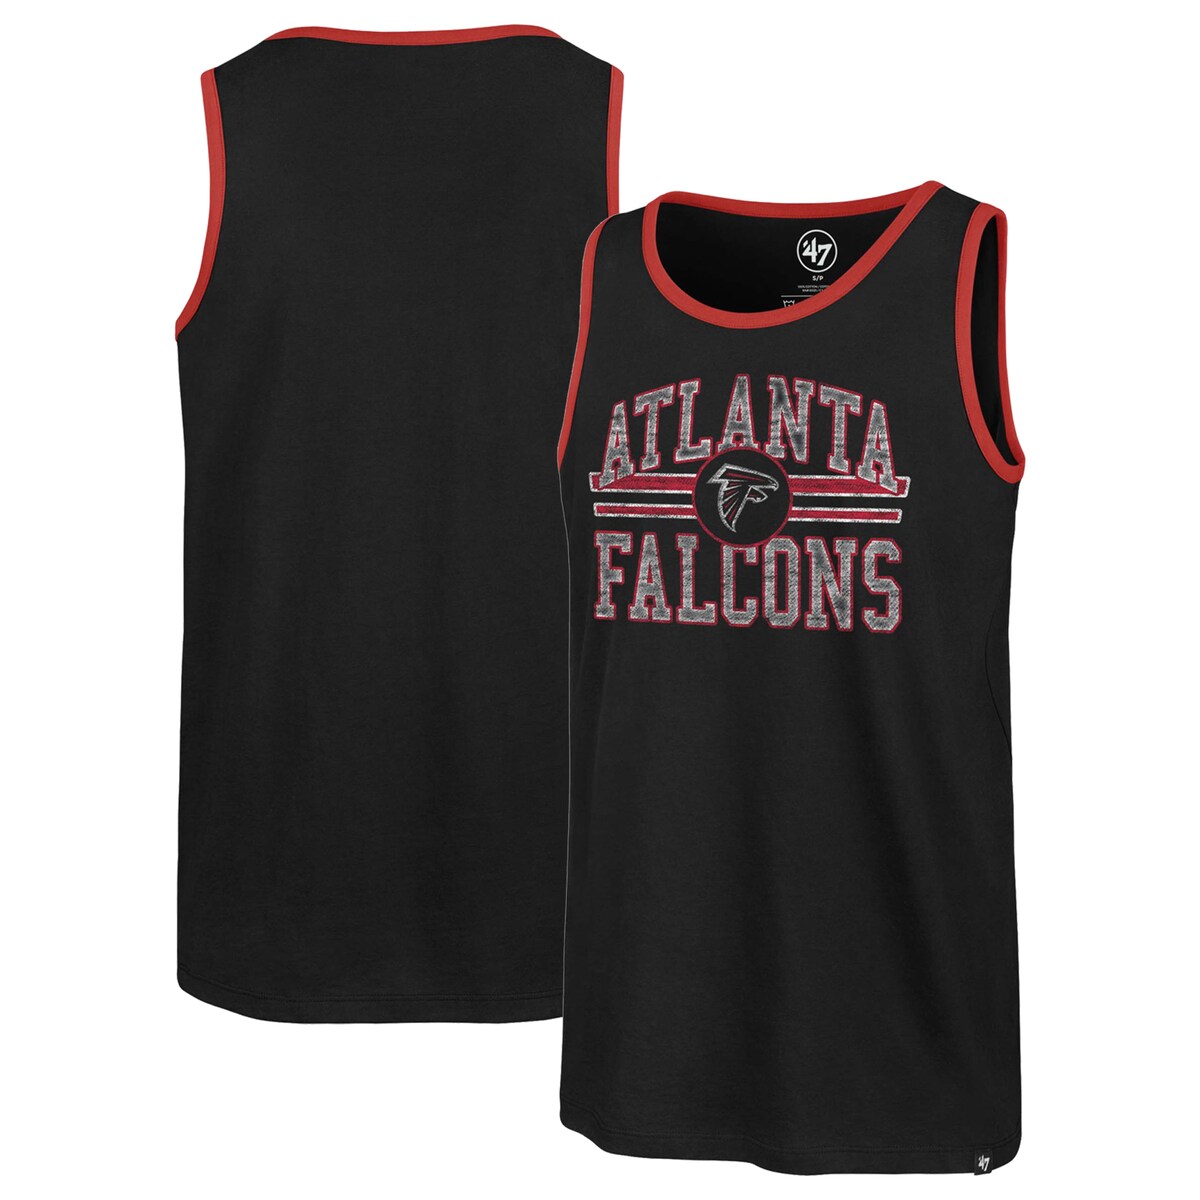 Stay cooler on sunny Atlanta Falcons game days in this Winger Franklin tank top from '47. It features team graphics printed in a vintage design on breathable fabric. The contrasting trim also accentuates your Atlanta Falcons fandom.Material: 100% CottonMachine wash, tumble dry lowRibbed collar and trimImportedOfficially licensedSleevelessDistressed screen print graphicsBrand: '47Crew neck